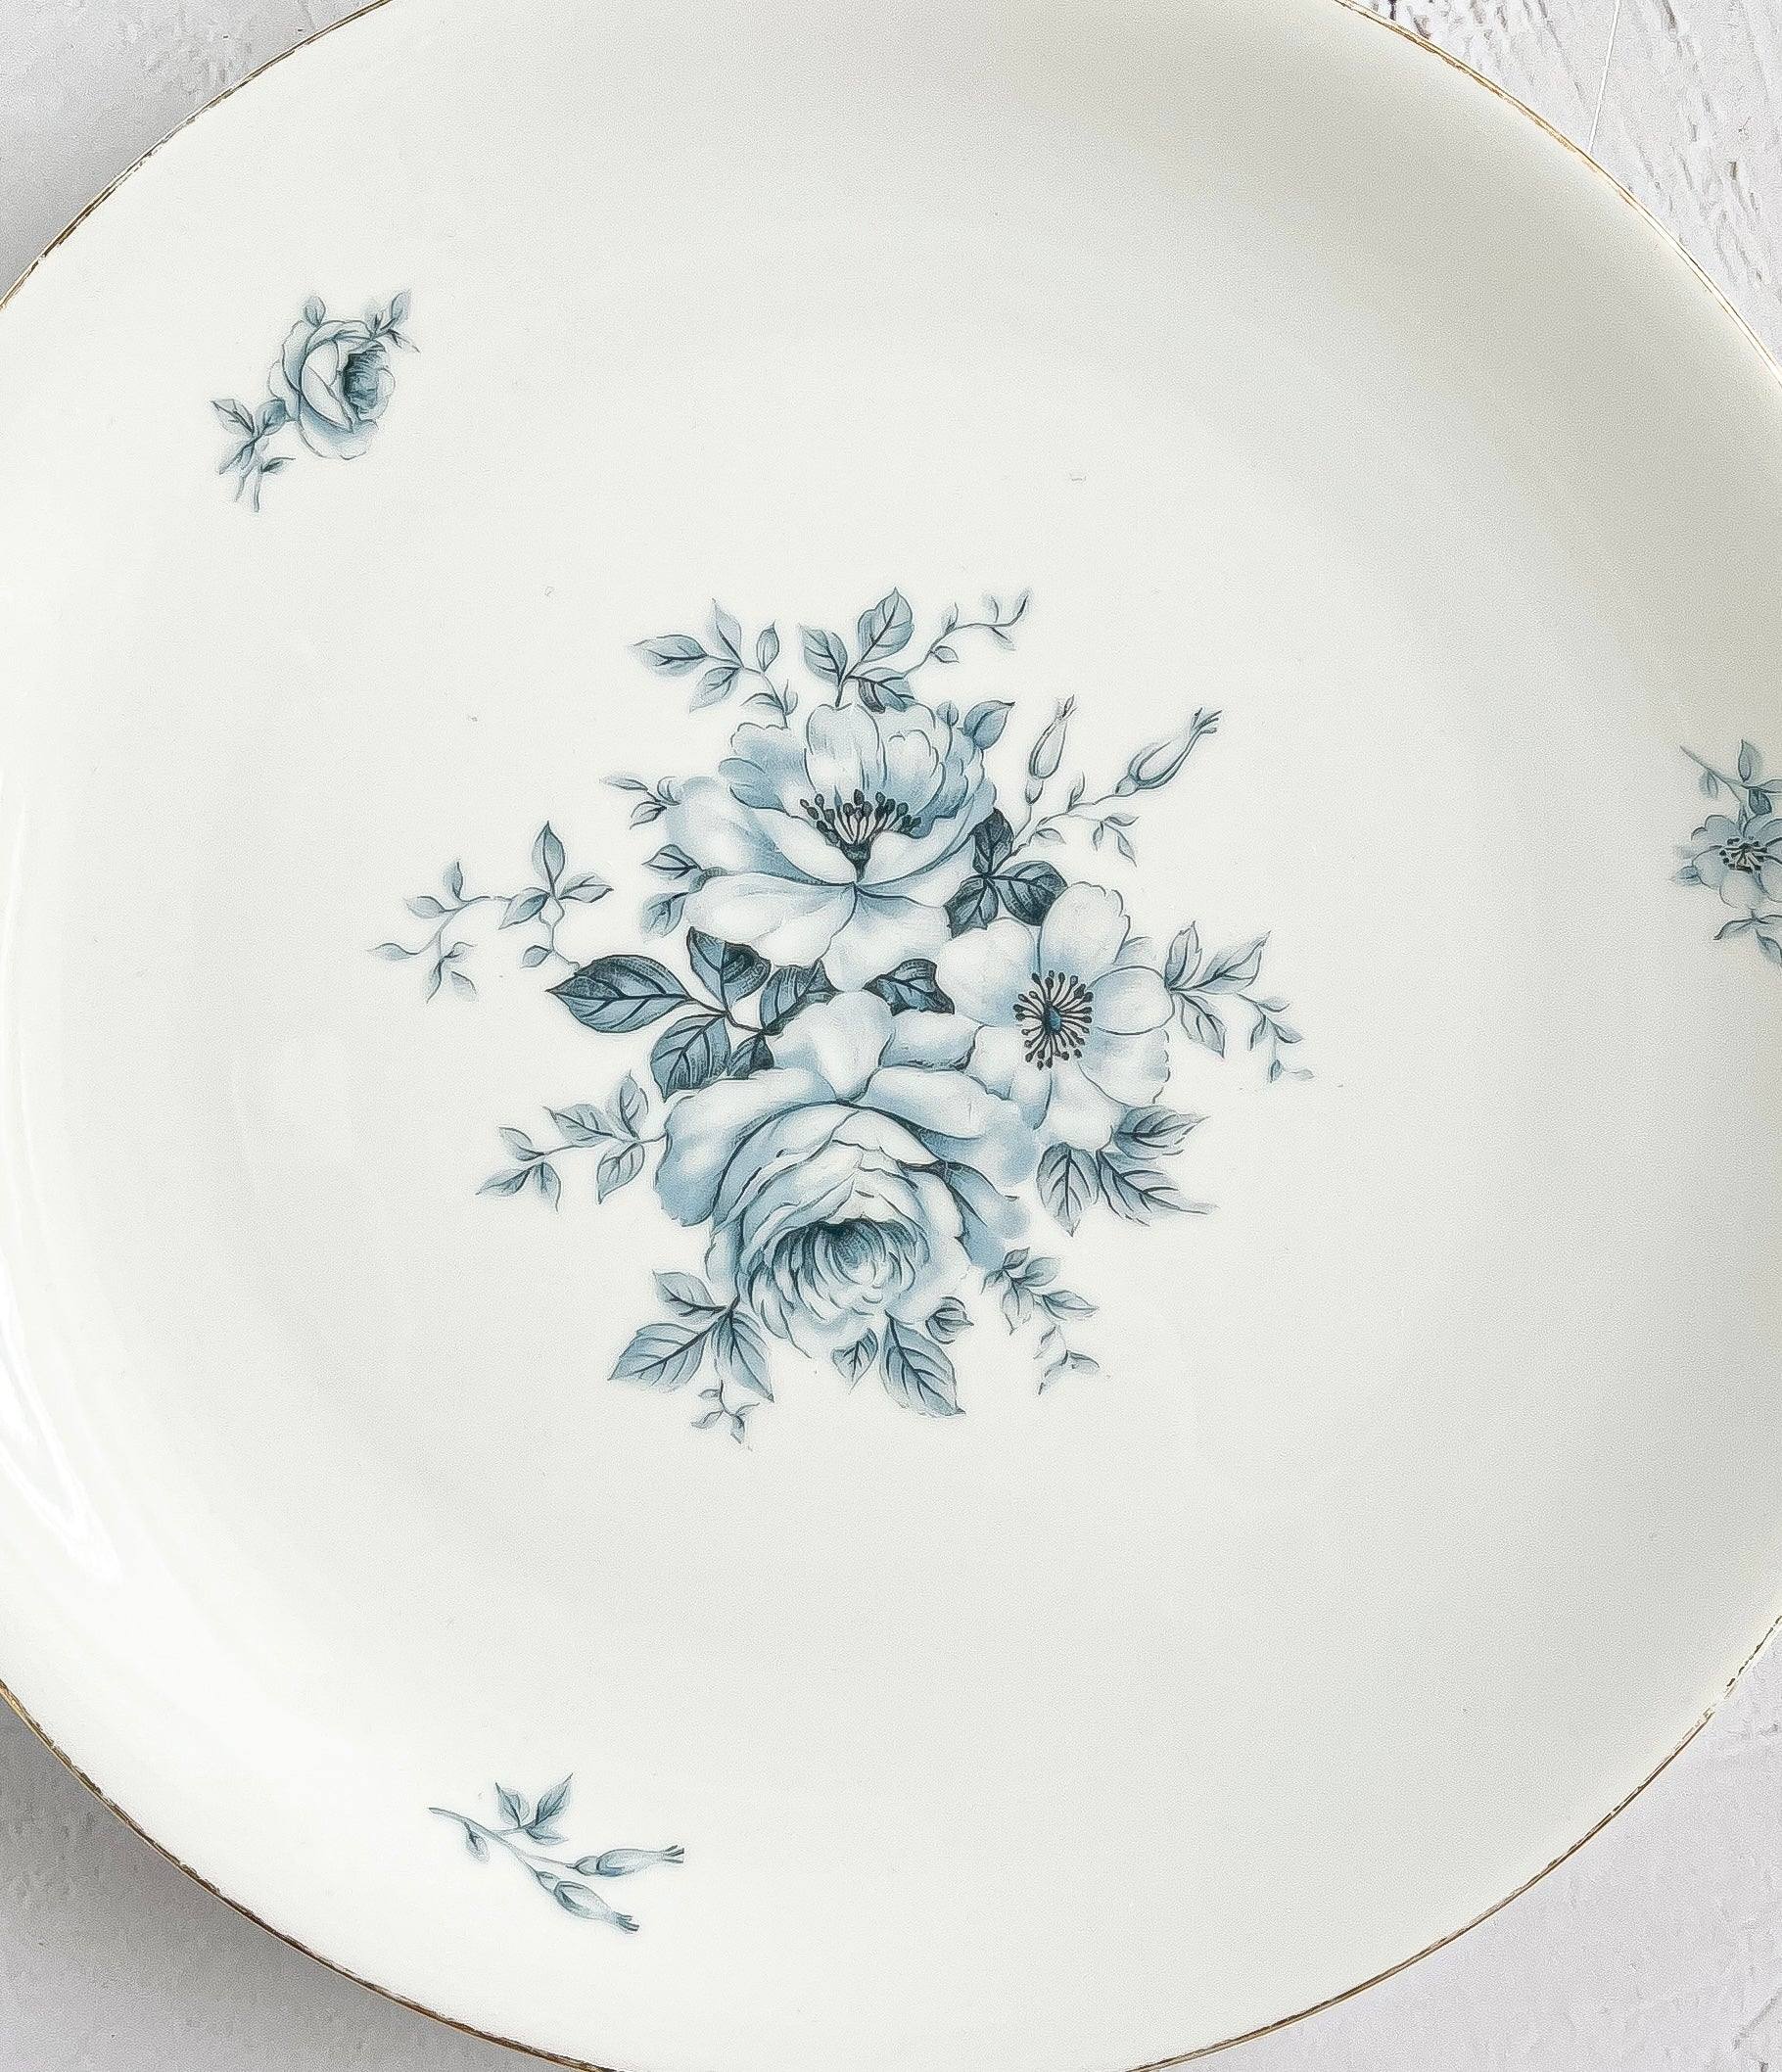 KPM Bread and Butter Plate - ‘Krister’ Collection - SOSC Home